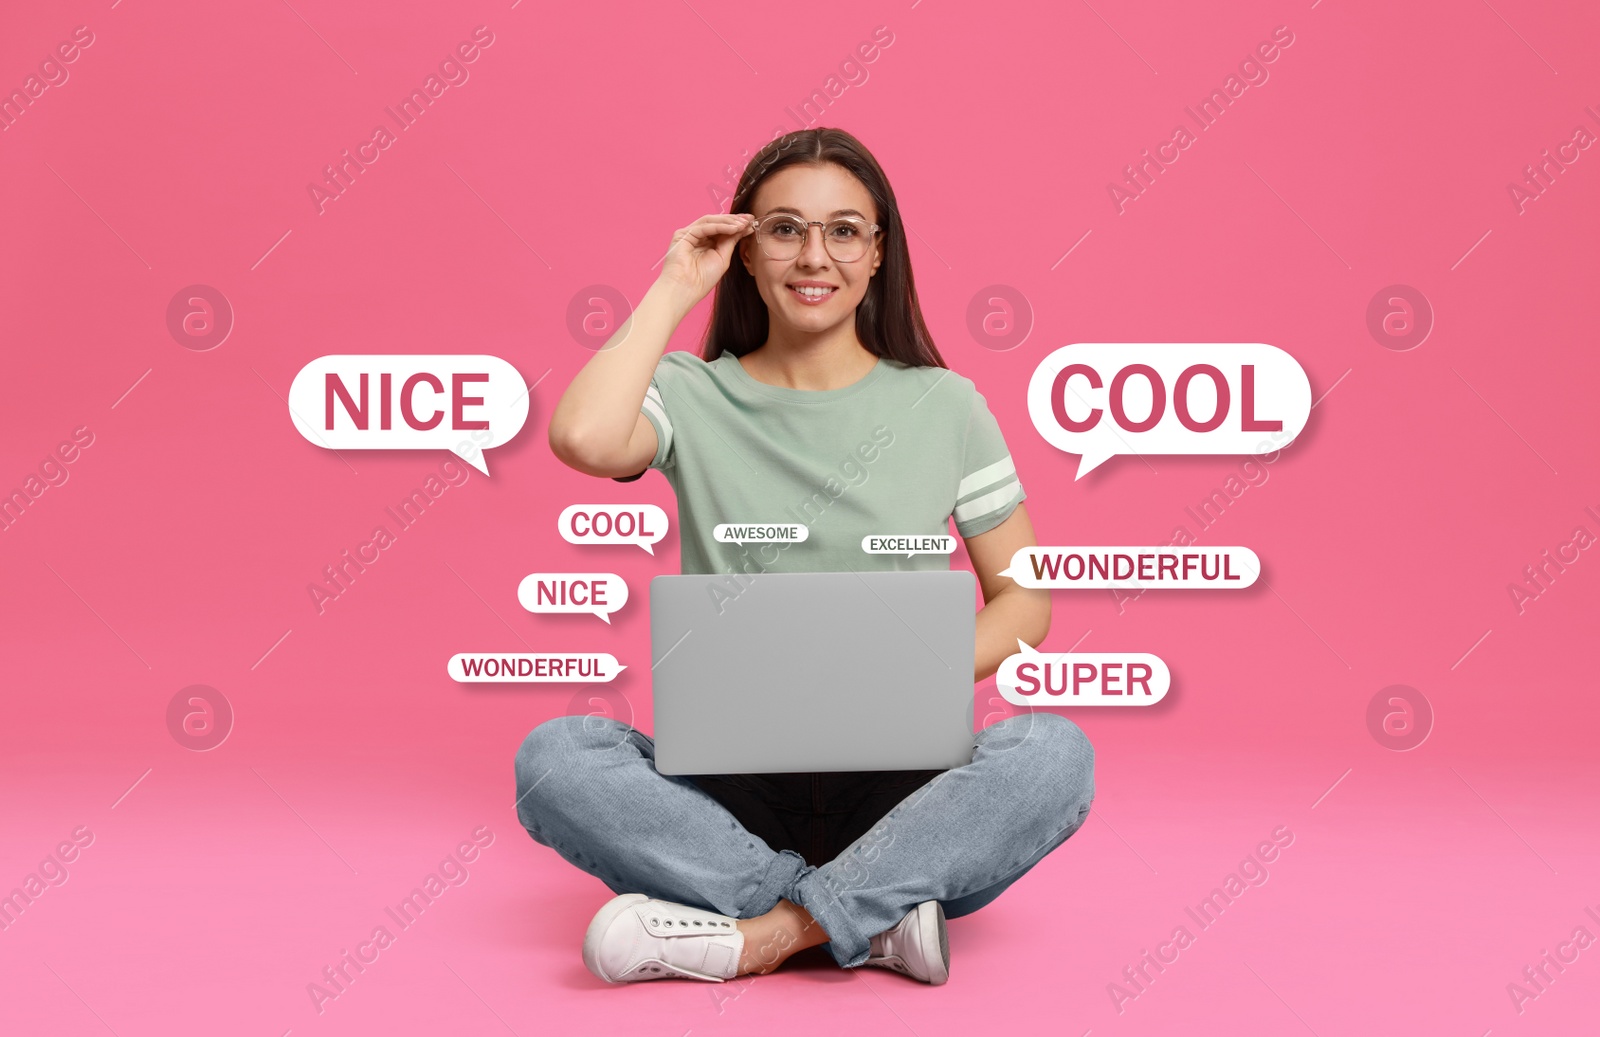 Image of Woman using laptop to give feedback on pink background. Customer review